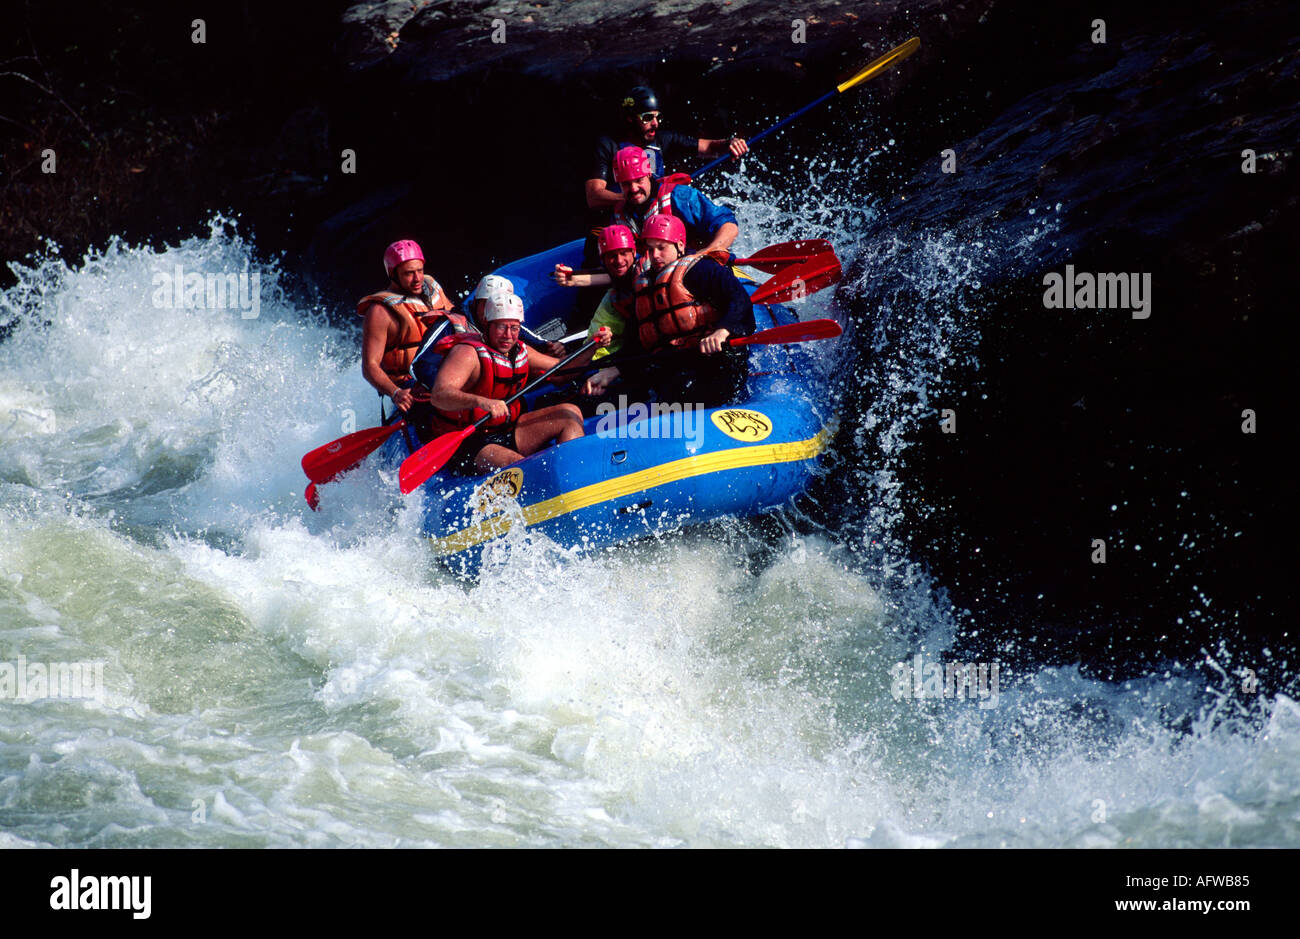 Rafting through Pillow Rock, a grade 5 rapid on the Gauley River, West Virginia, USA Stock Photo